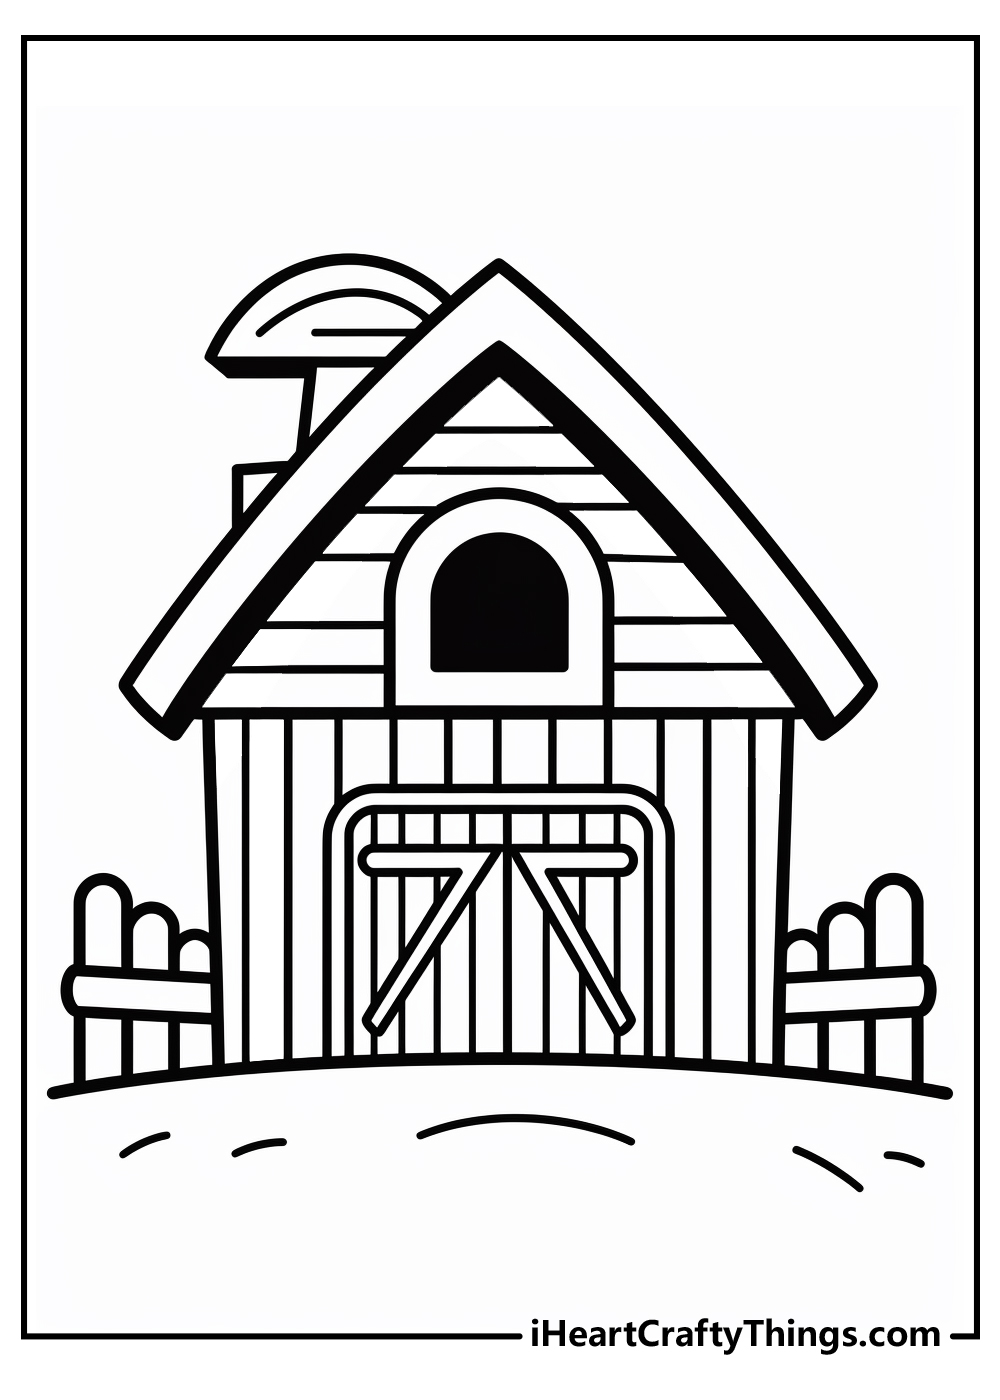 Barn coloring pages free printables